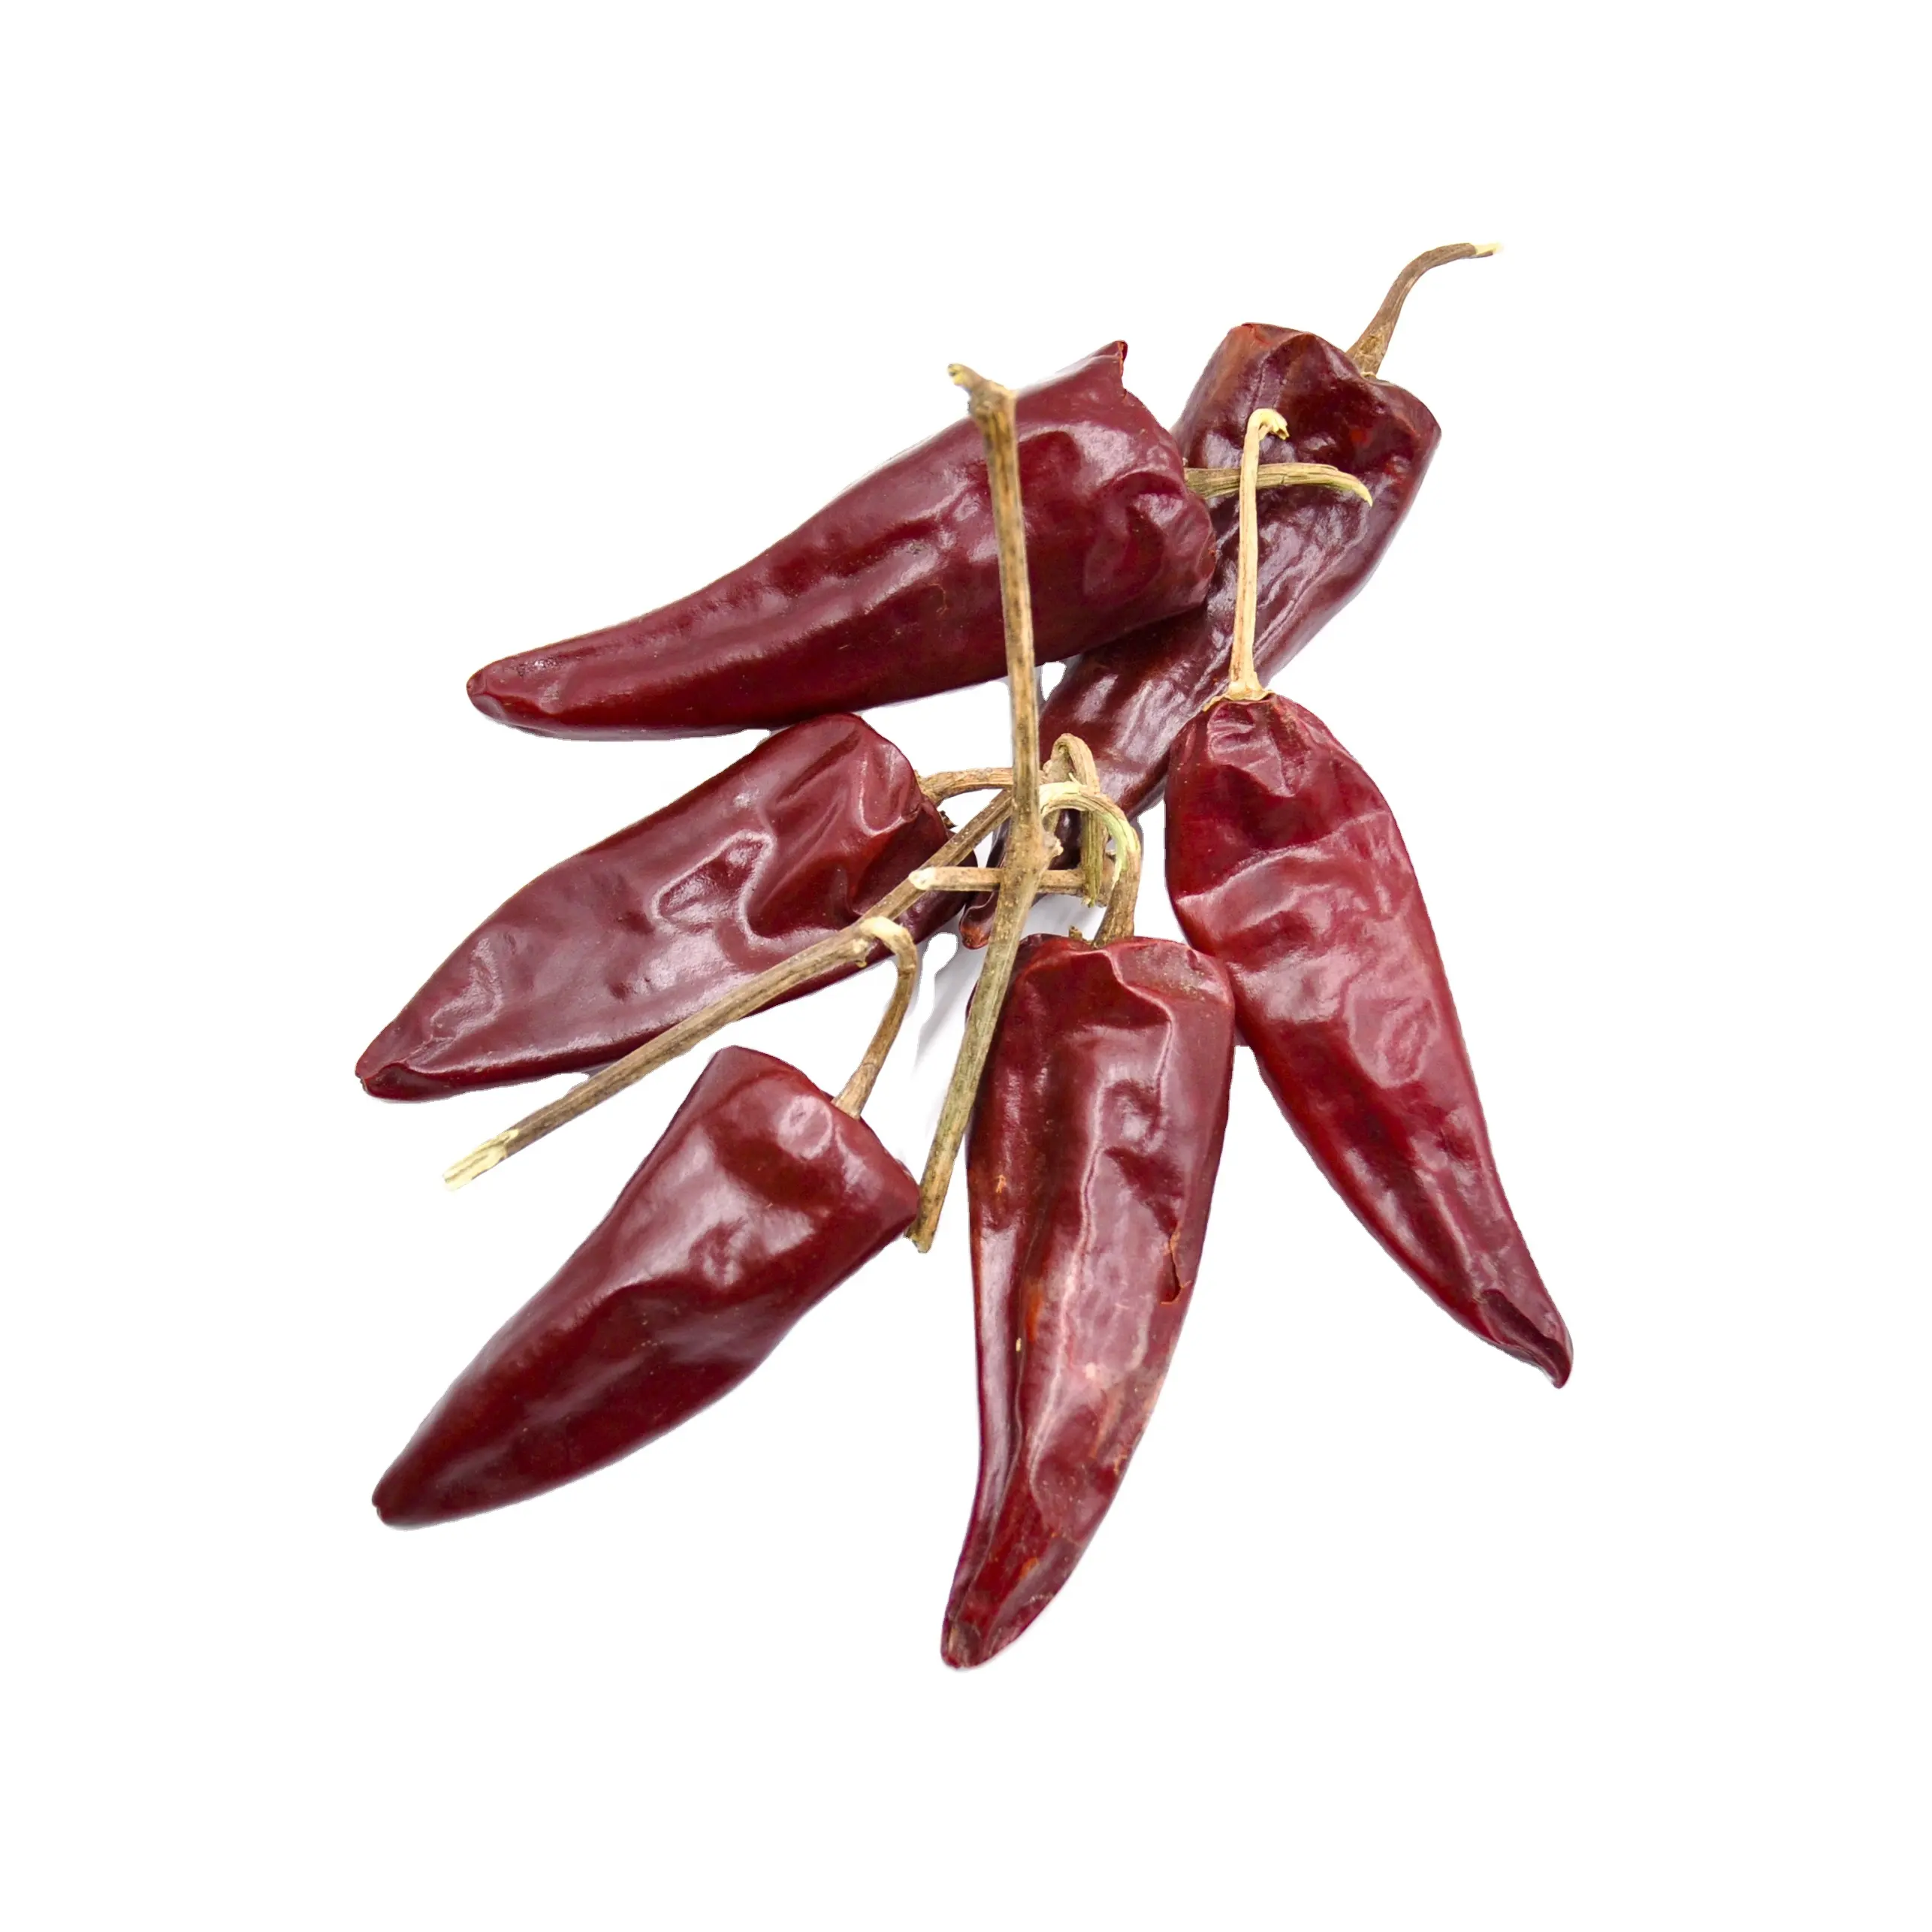 Hot Selling Nieuwste Crop Vers Rood China Chilipeper Biologische Gedroogde Chili Hot Dry Beijing Rode Droge Chilipeper